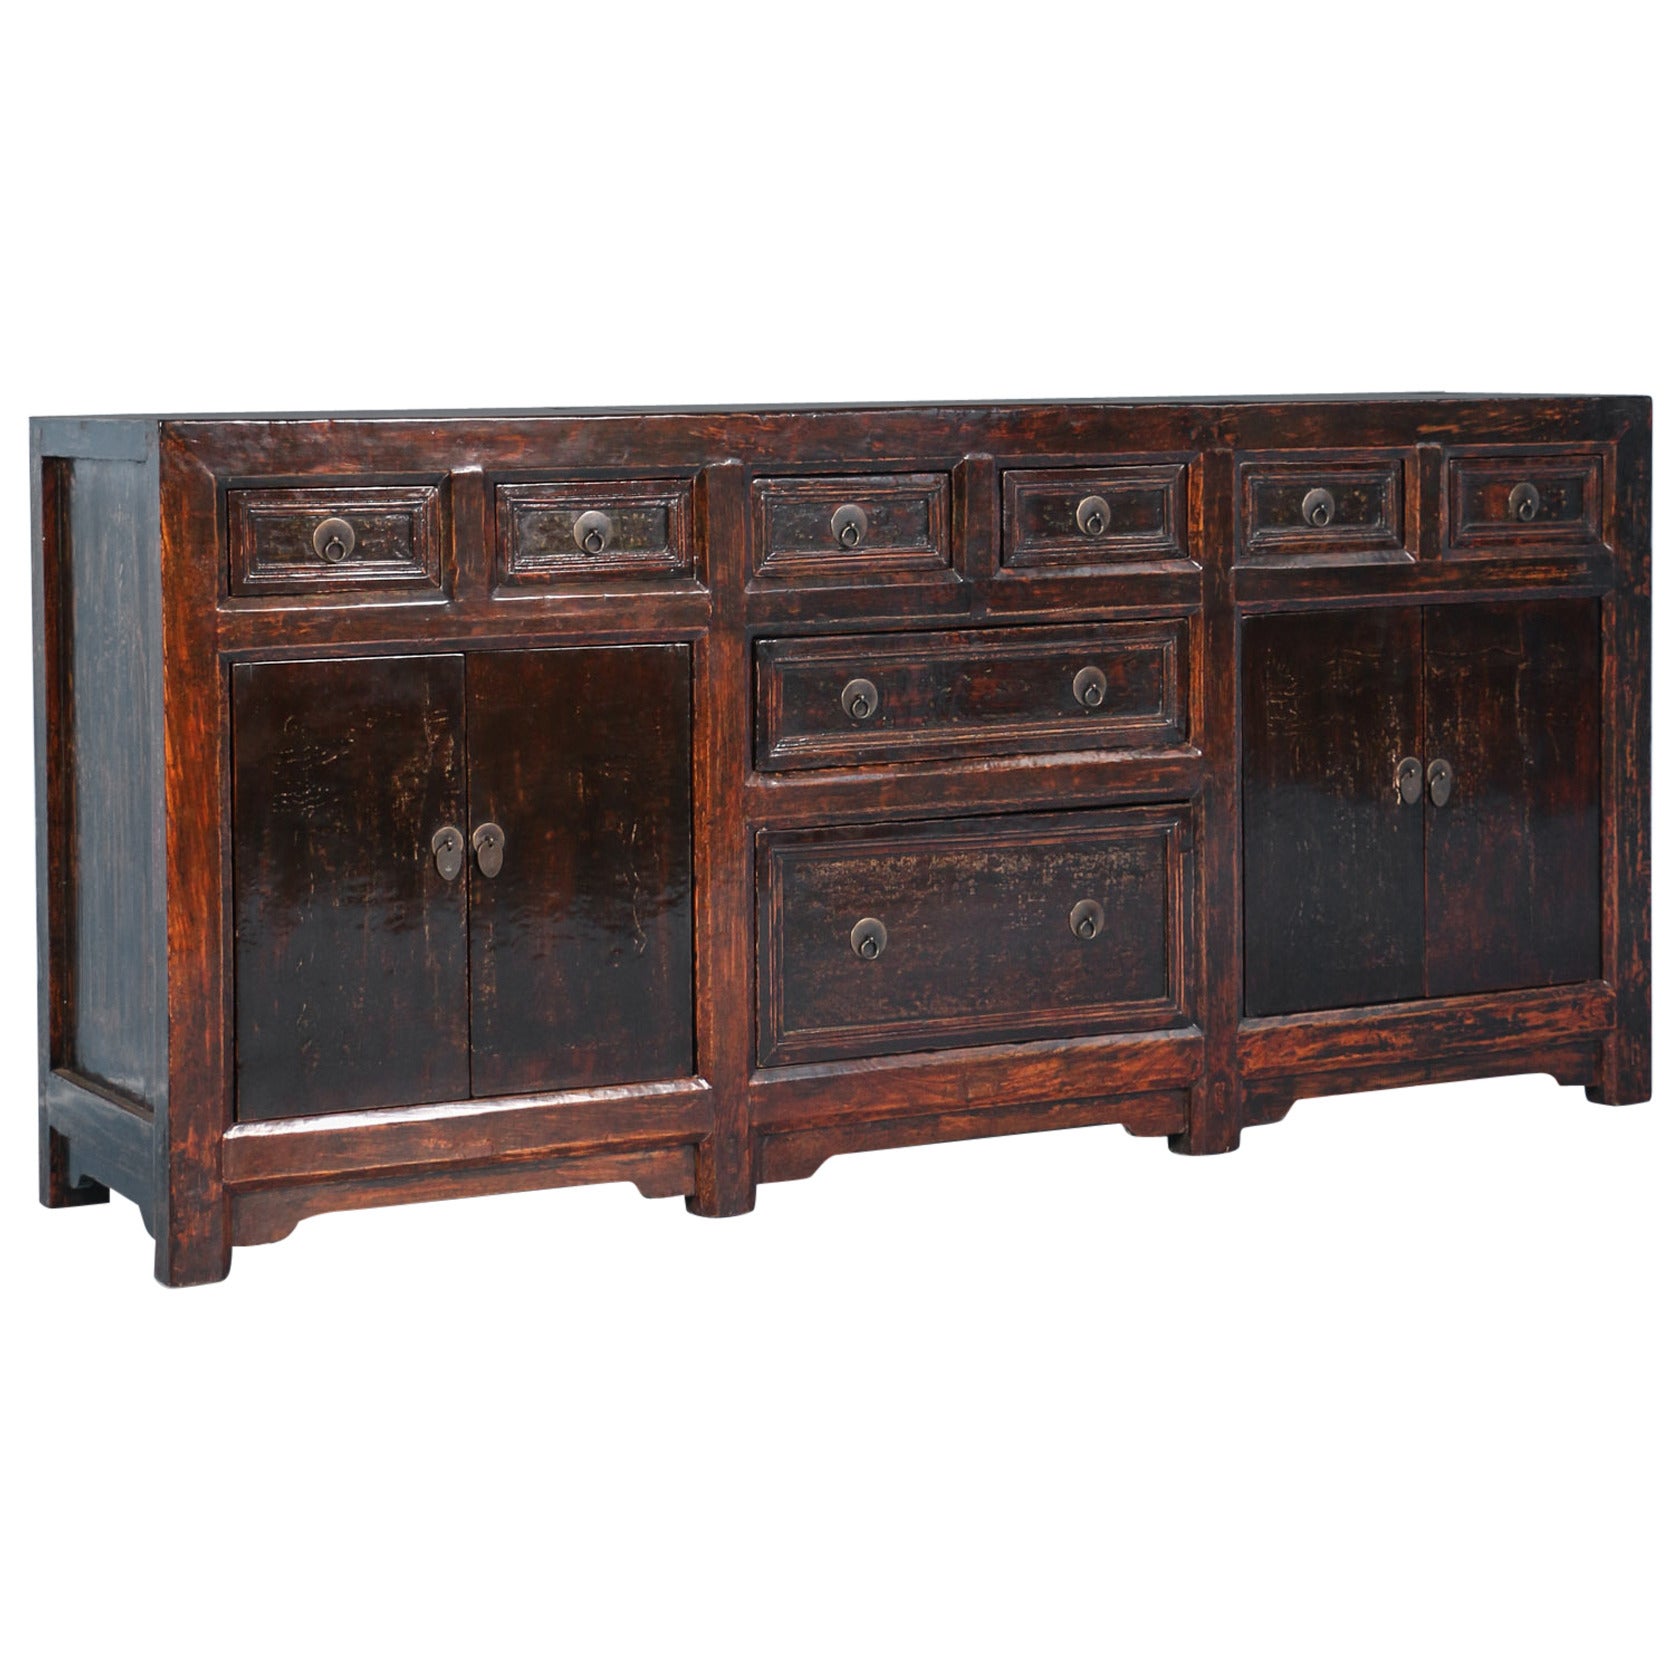 Antique Brown Lacquered Chinese Sideboard, circa 1840